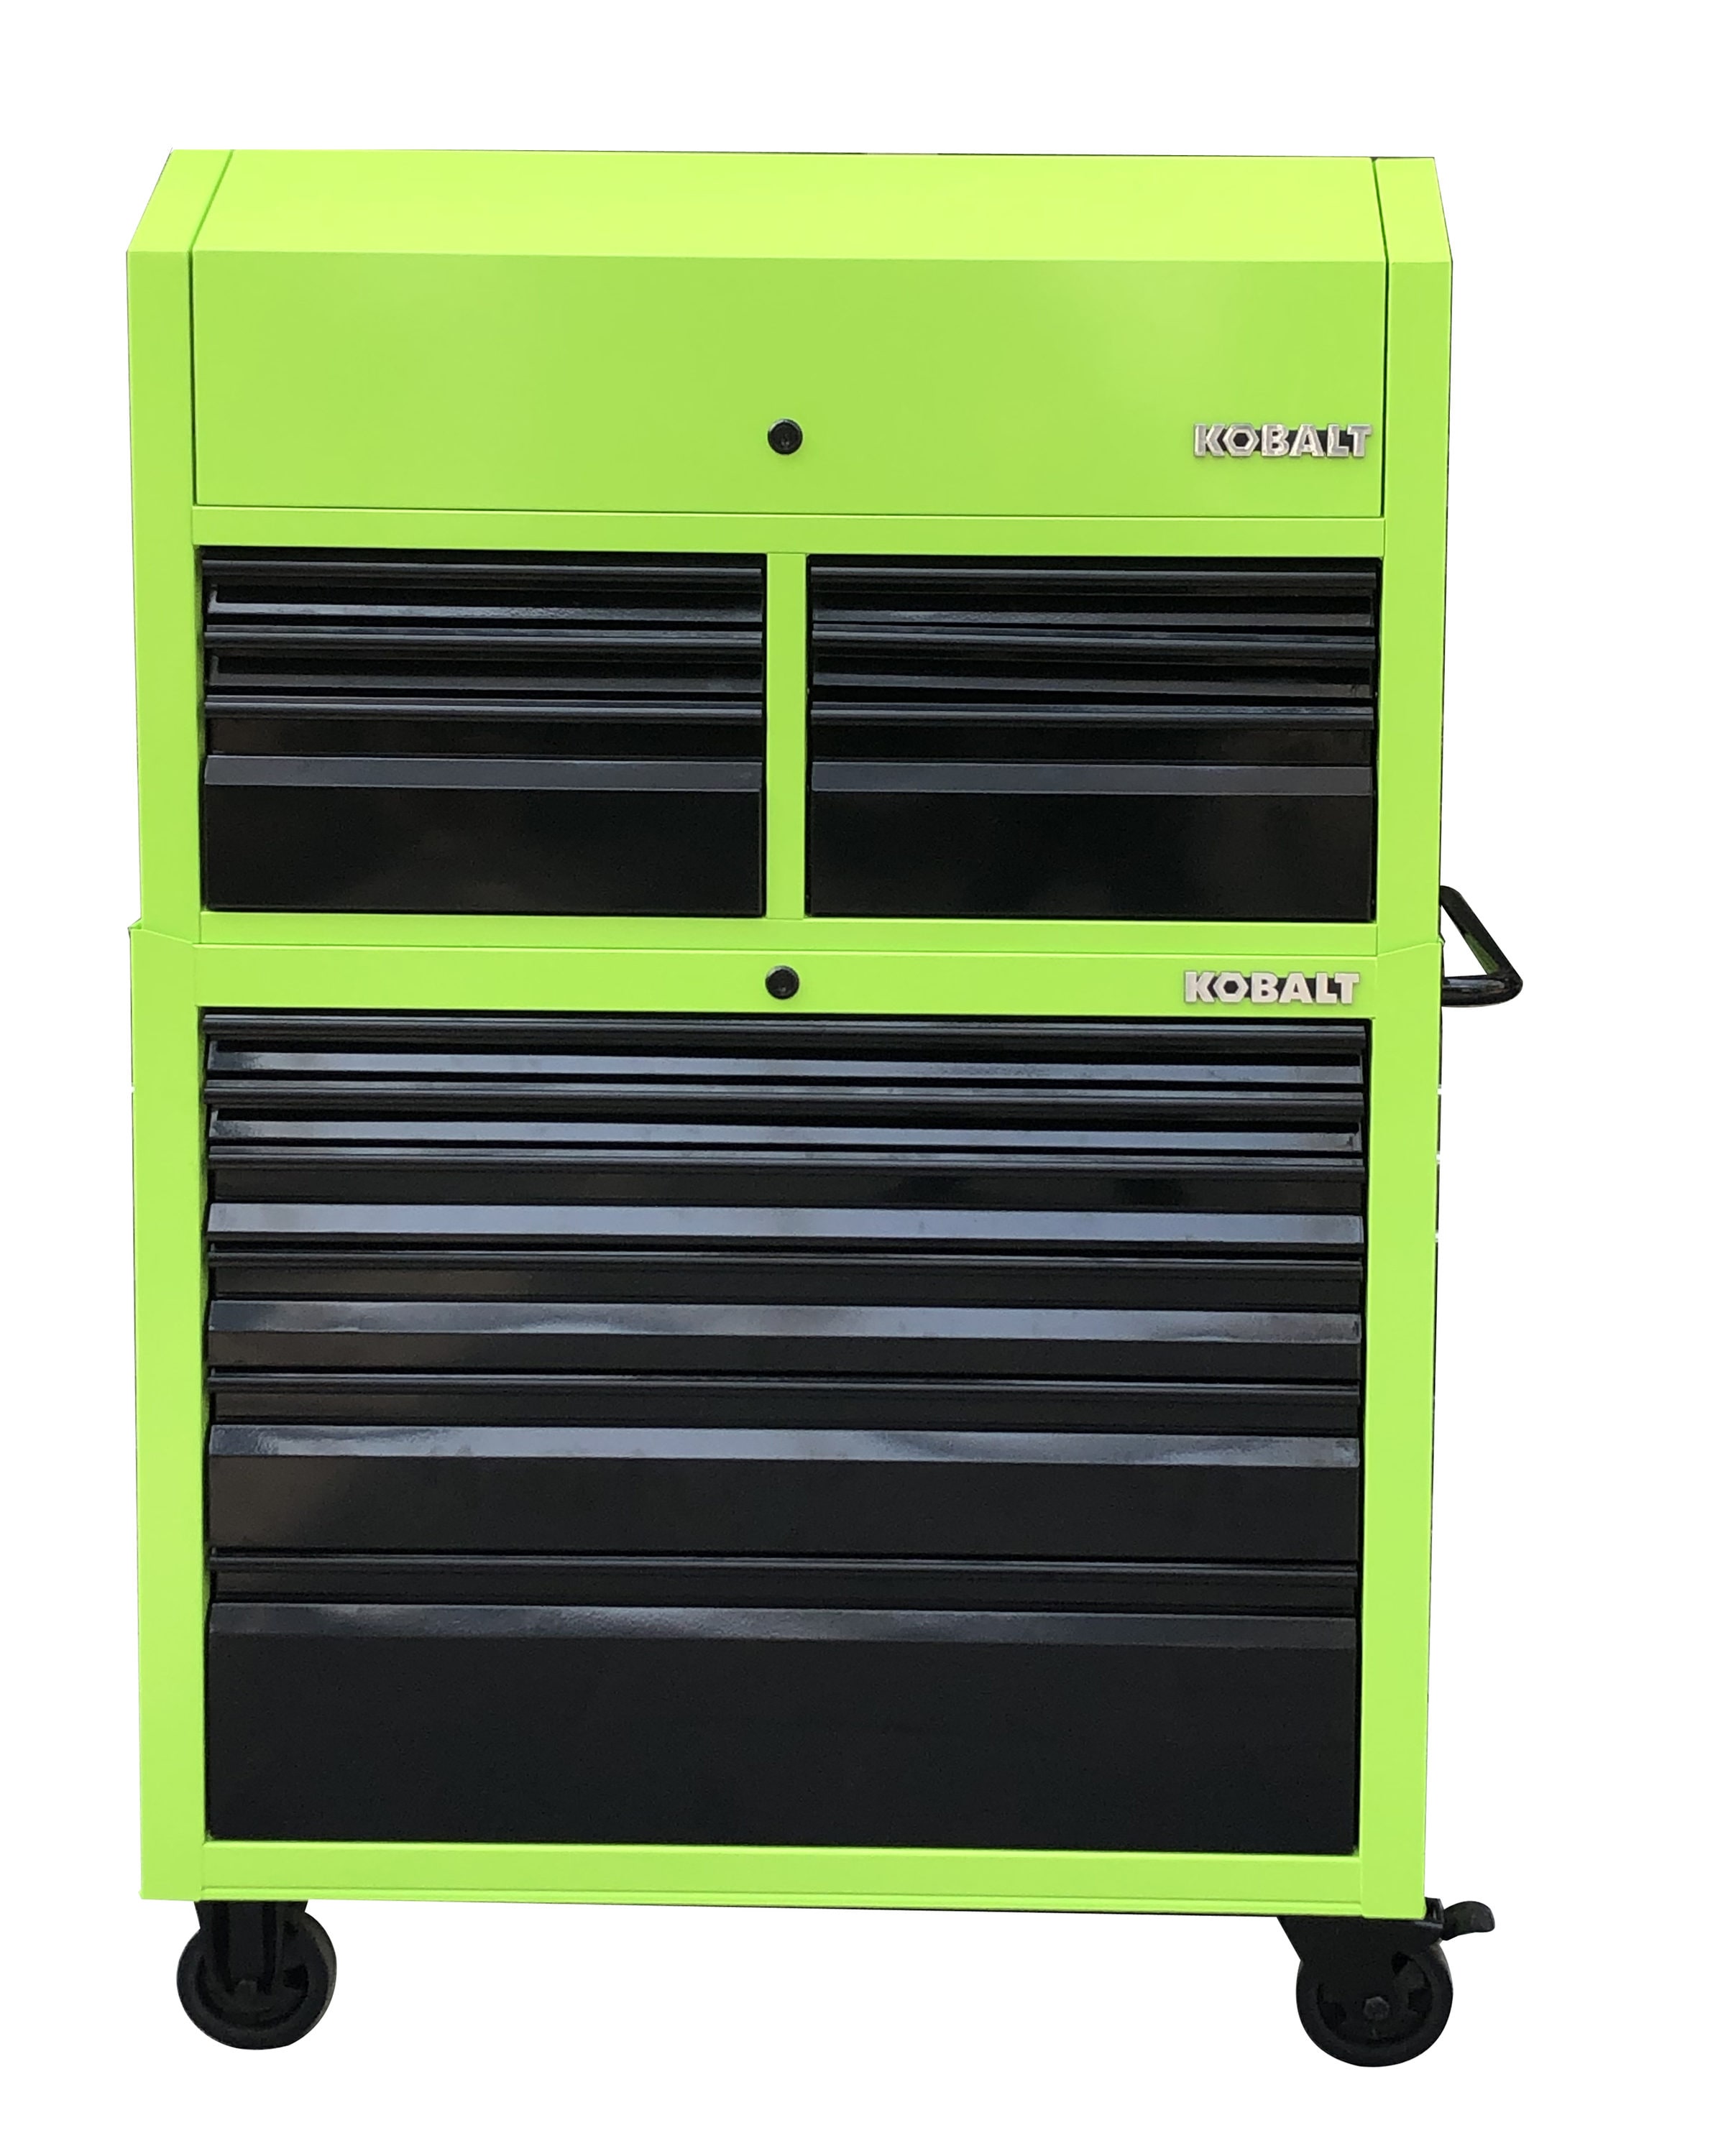 Kobalt 43.6-in W x 63.4-in H 12 Ball-bearing Steel Tool Chest Combo (Green)  at